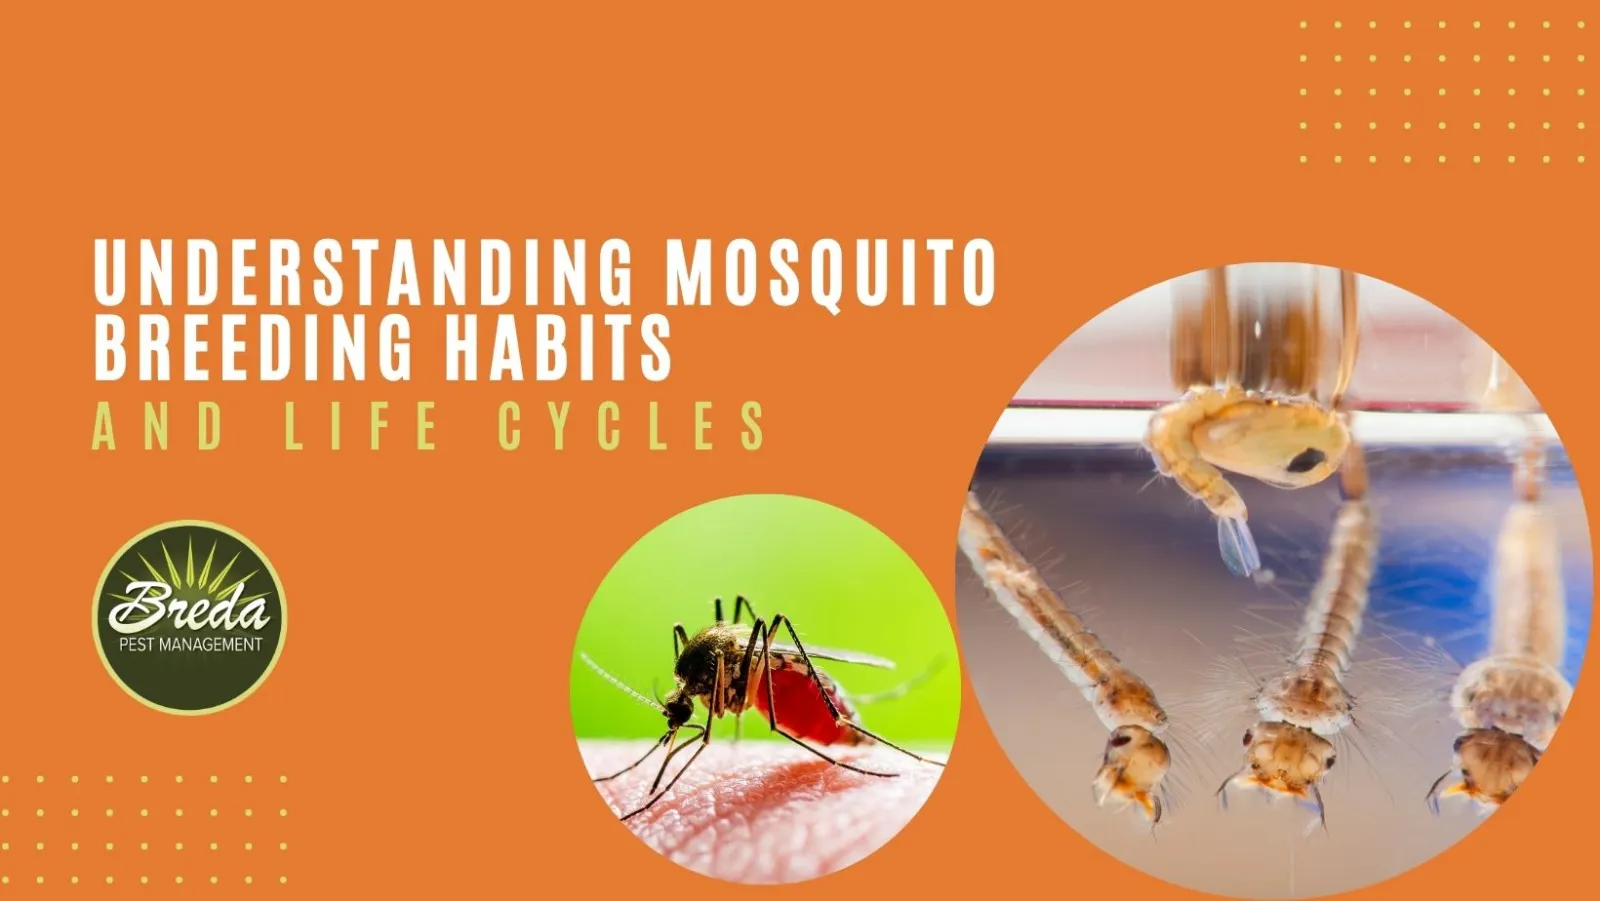 Title graphic: Understanding mosquito breeding habits and life cycles